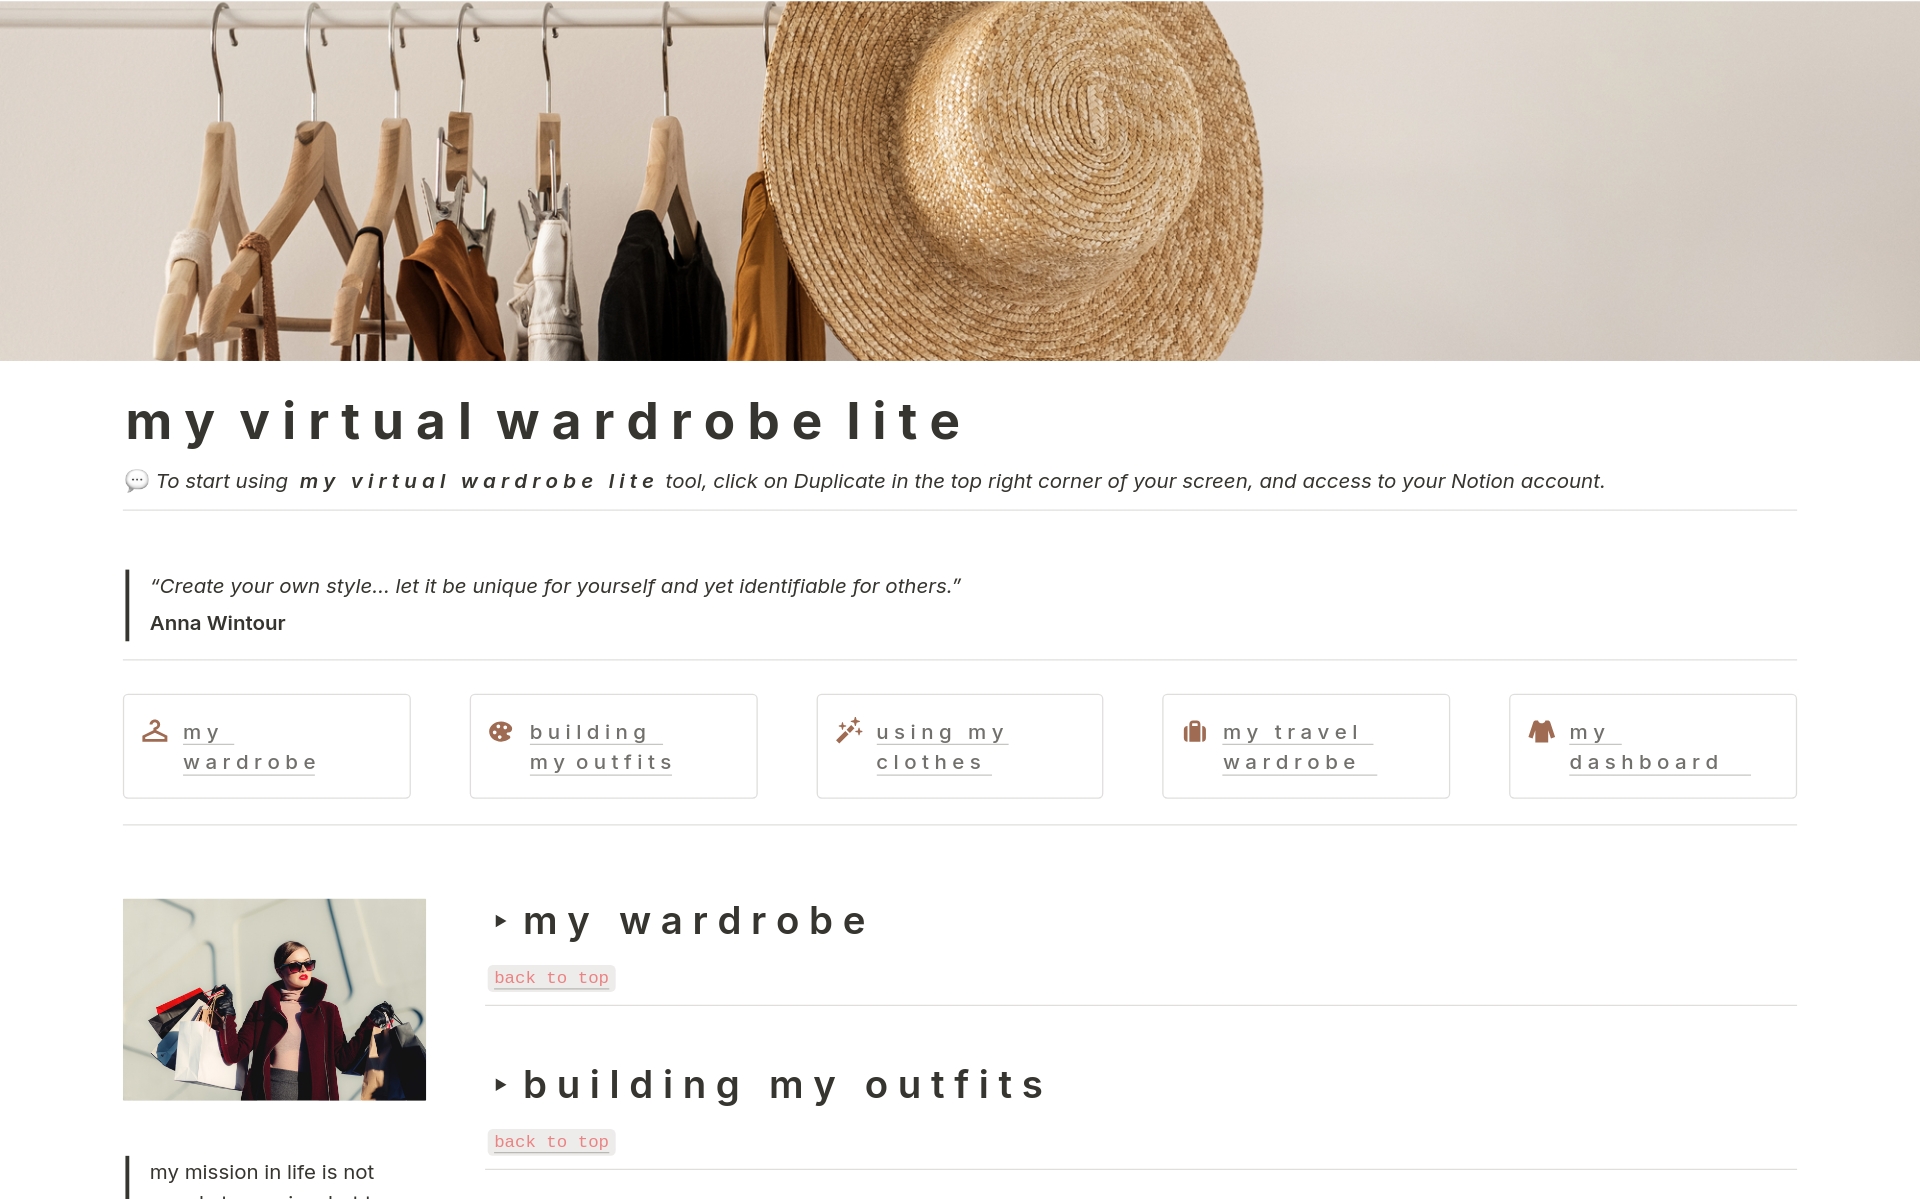 My Virtual Wardrobe Lite allows you to catalog your clothing collection, curate stunning outfits, and maximize your wardrobe's potential with ease. Effortlessly create chic looks, track clothing usage, and make the most of every style opportunity